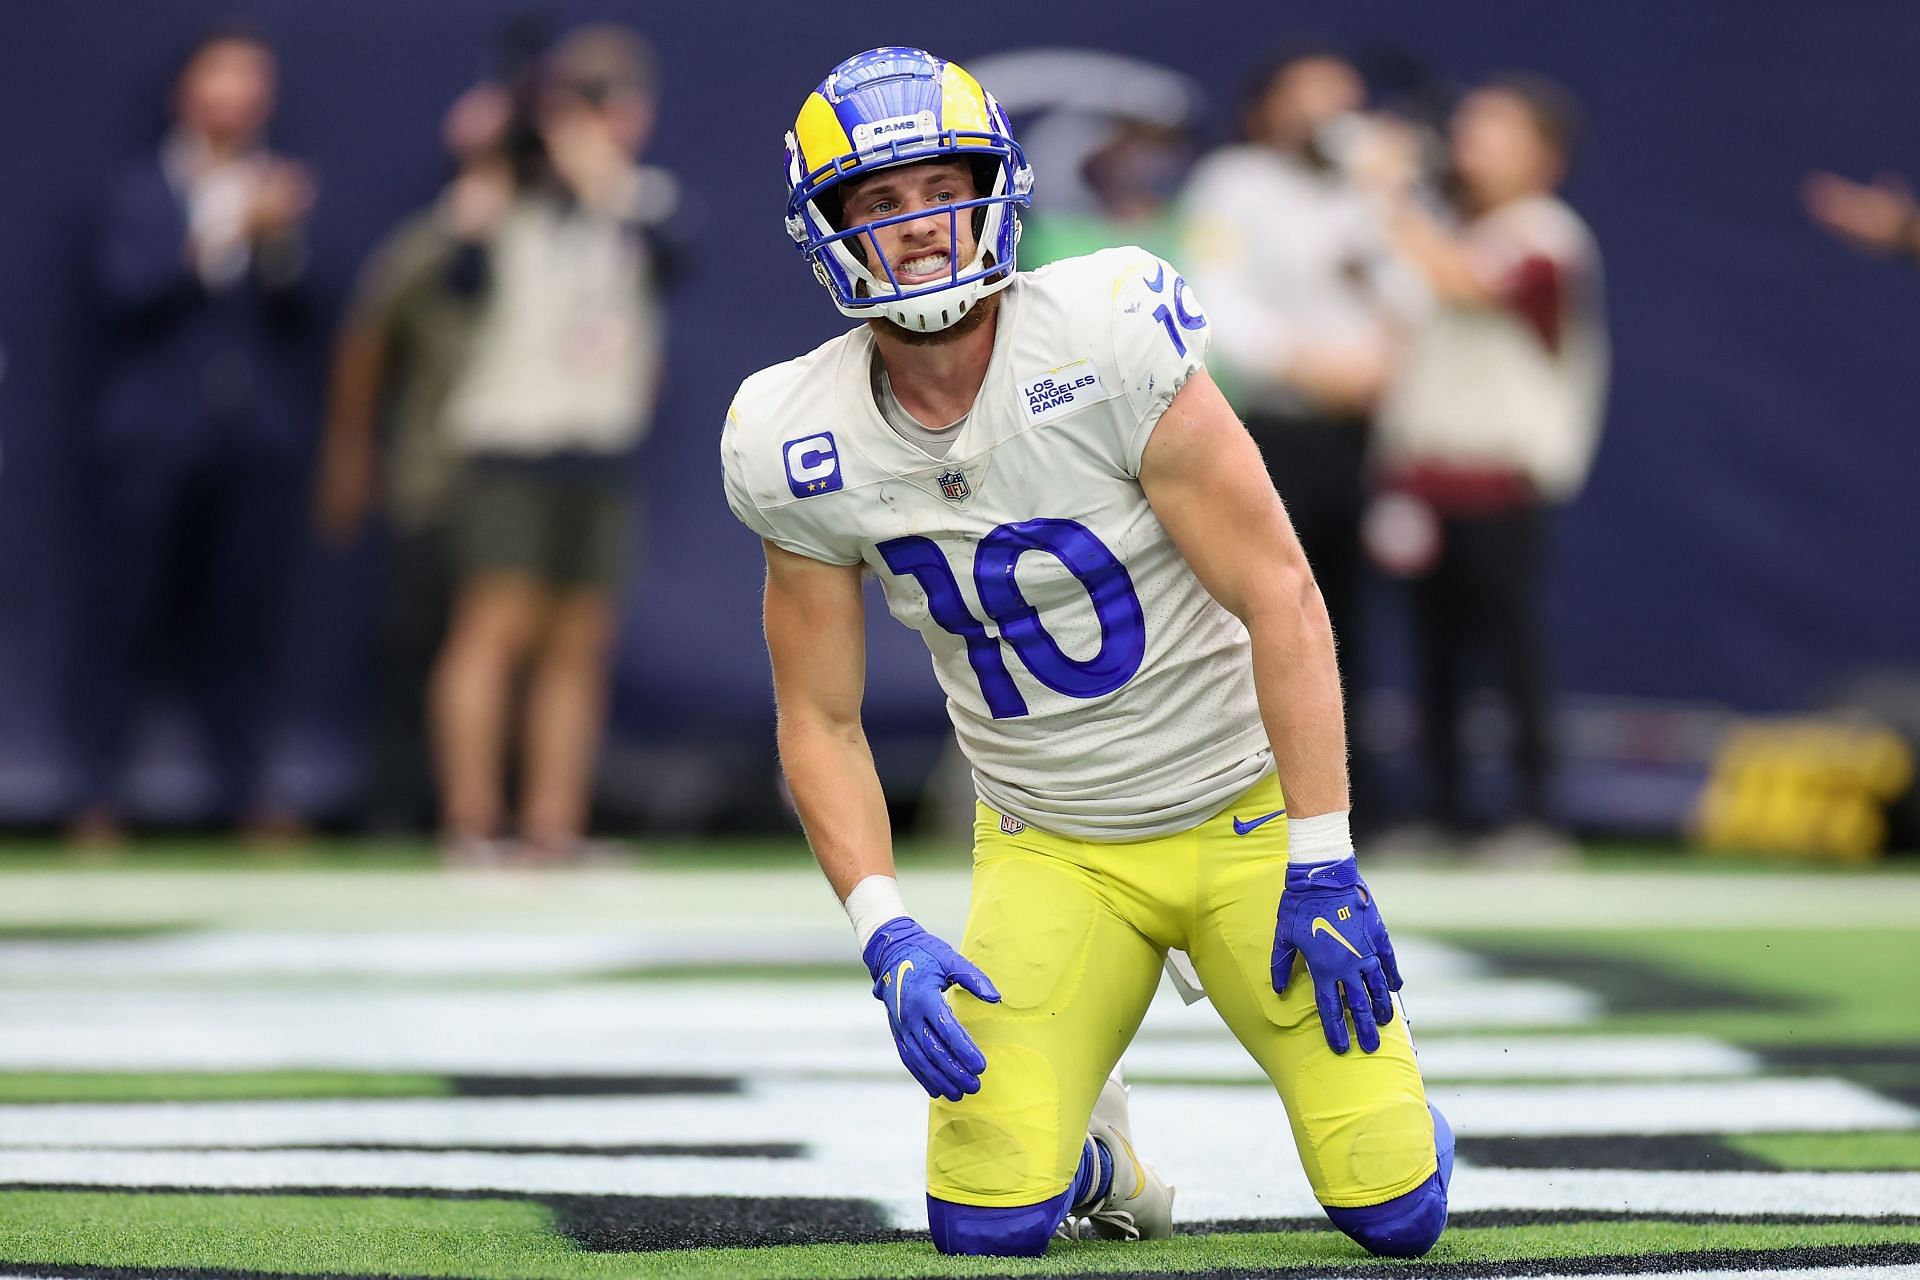 Cooper Kupp earned a big extension with the Los Angeles Rams